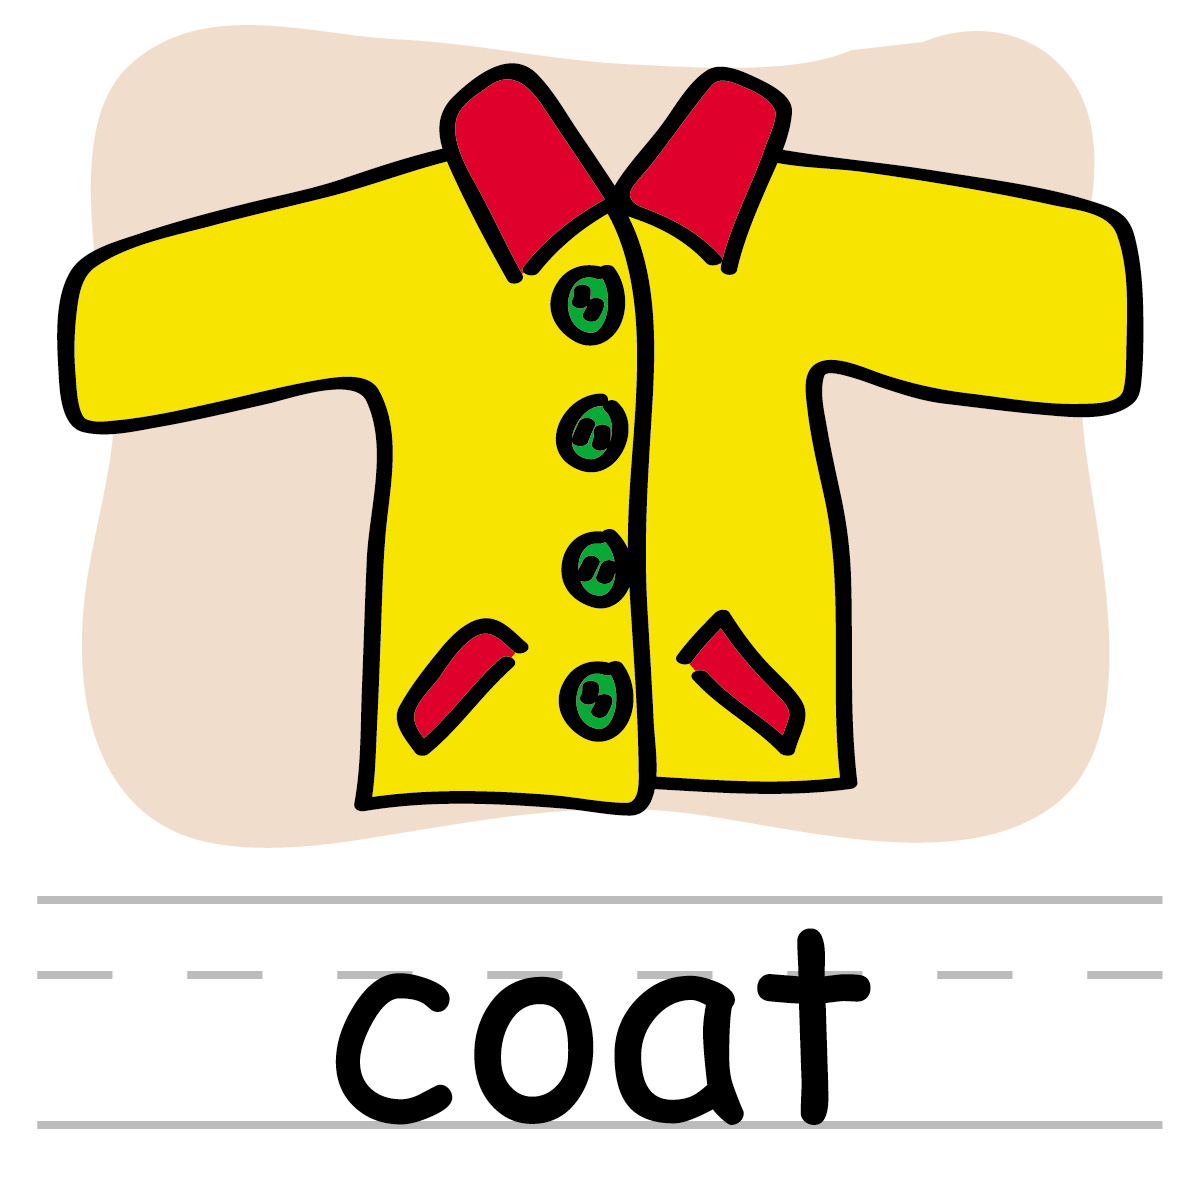 Pictures Of Coats - ClipArt | Clipart Panda - Free Clipart Images